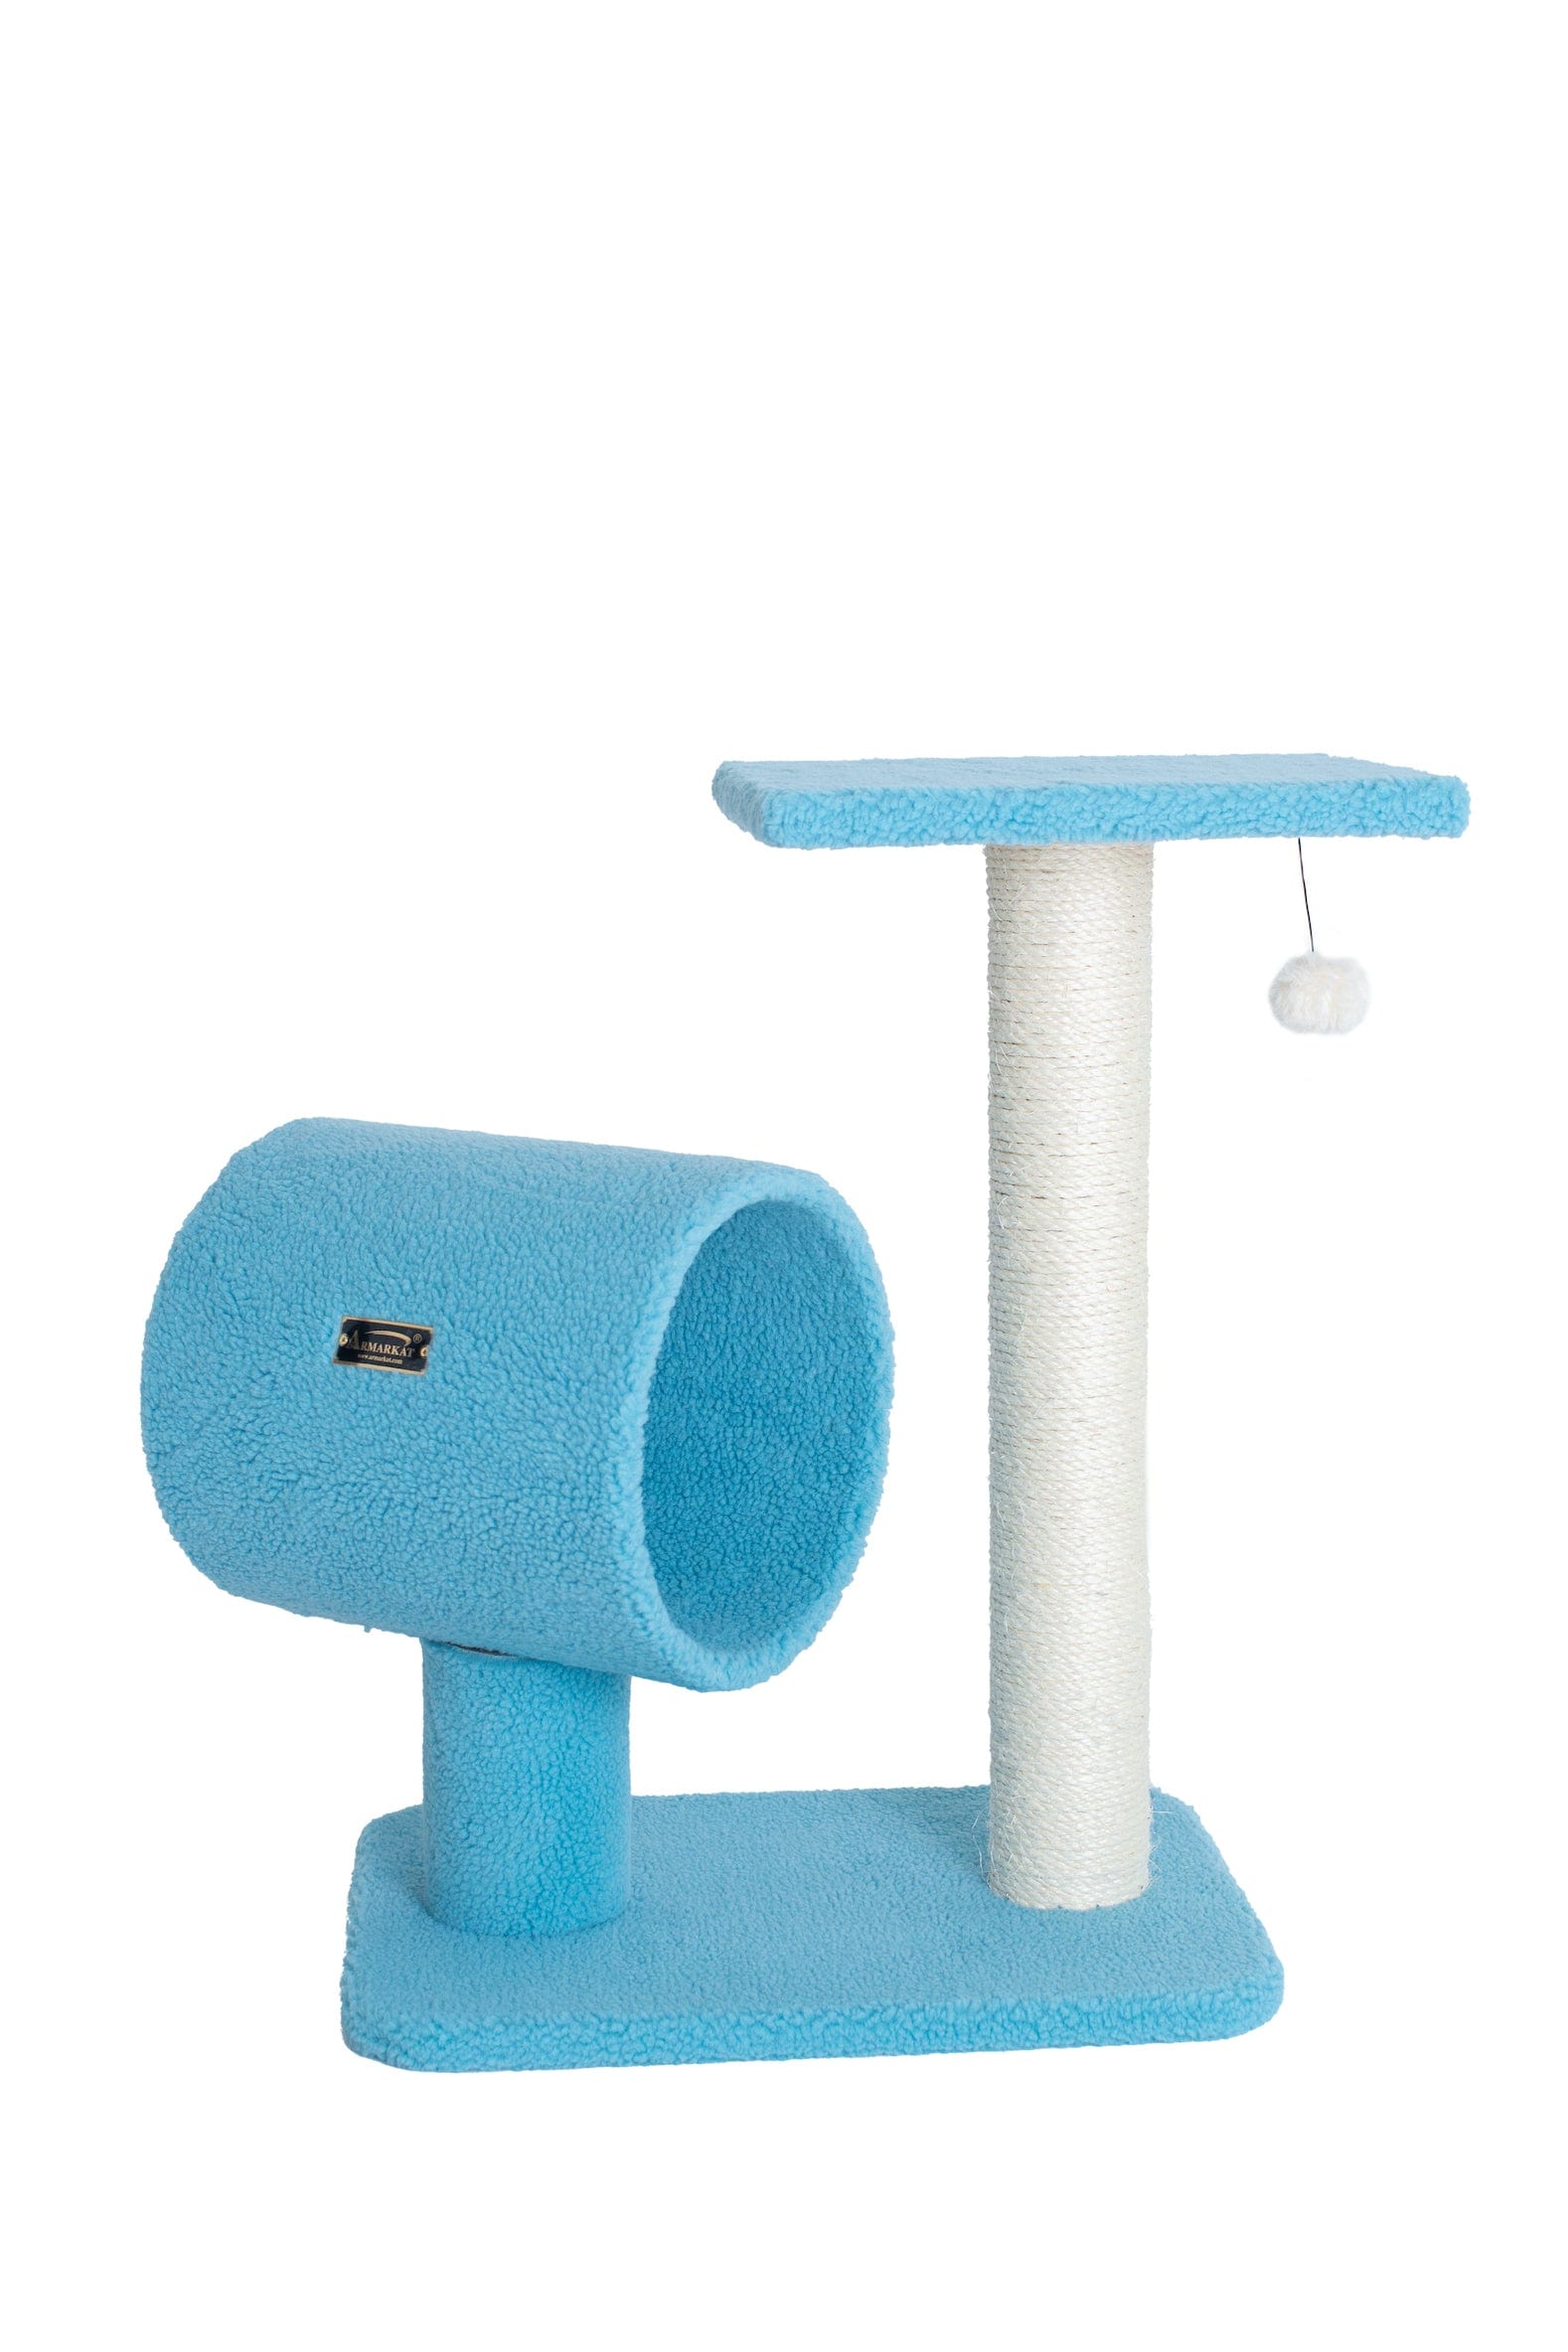 Armarkat  Classic Cat Tree in Sky Blue with Perch and Hanging Tunnel Model B2501 - Fuzz-E-Family